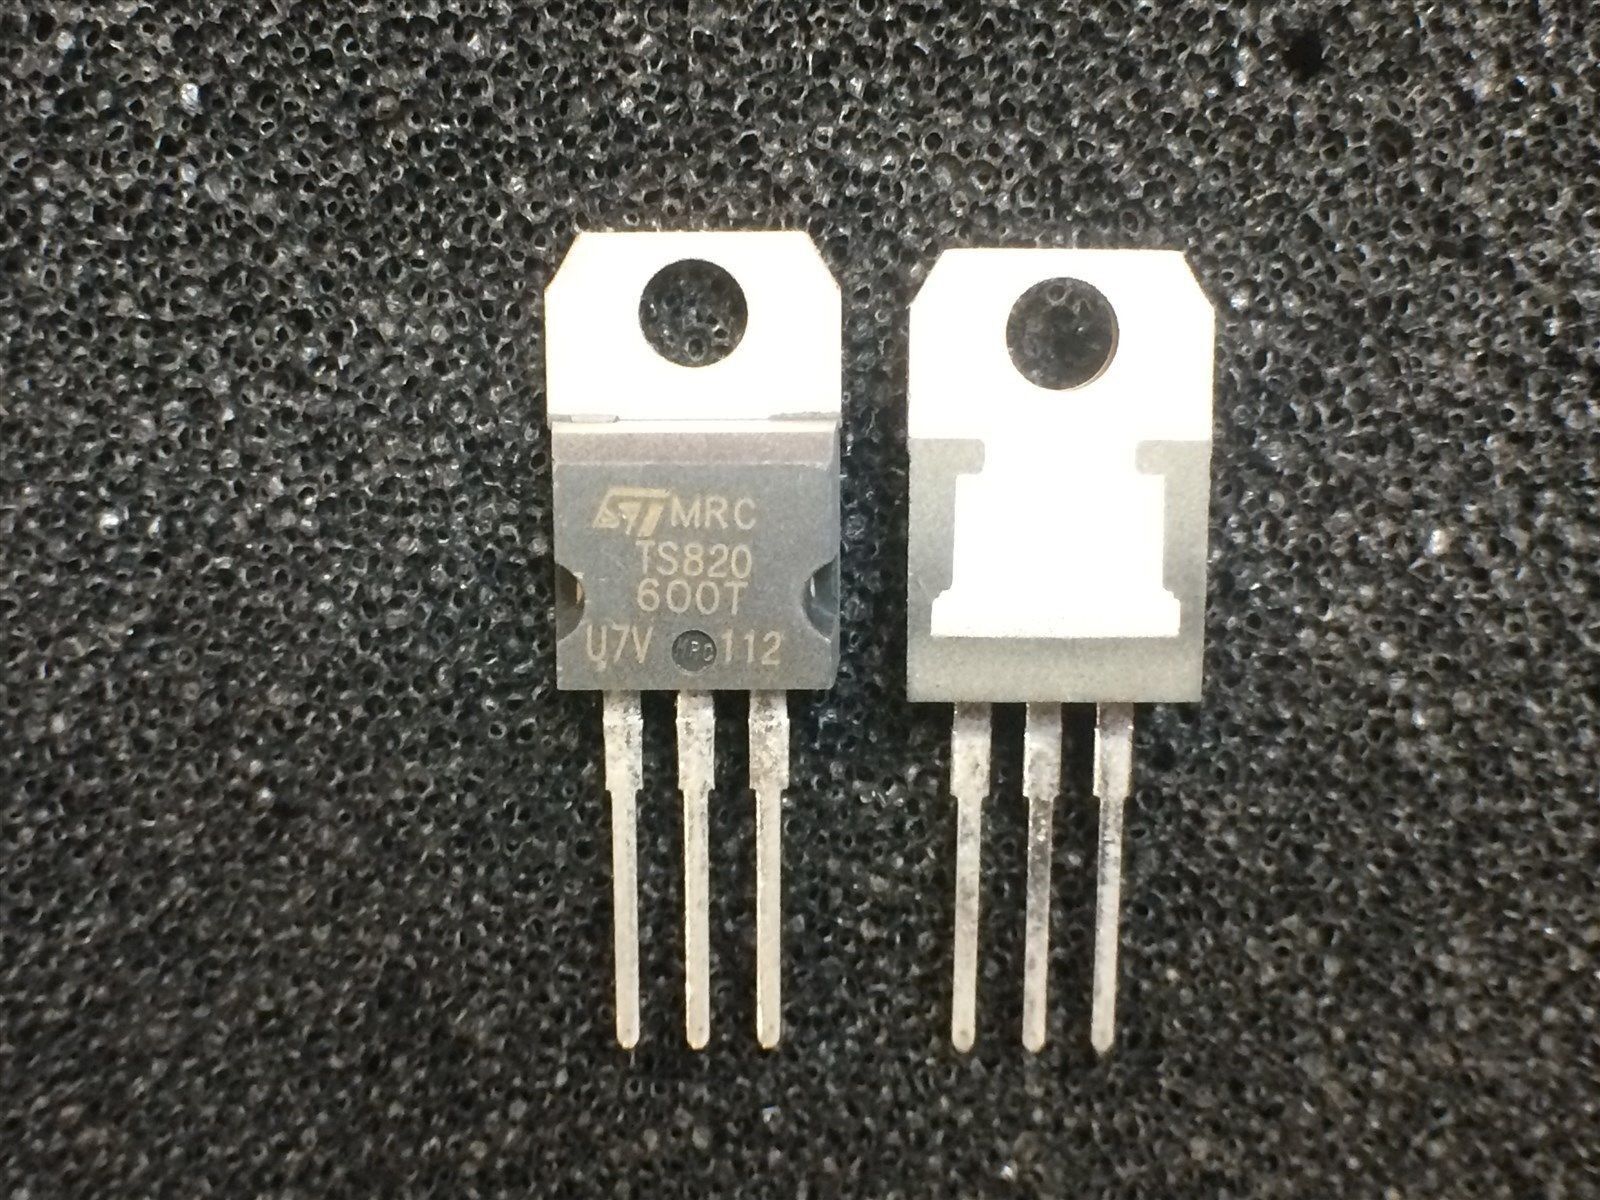 TS820-600T ST MICRO Thyristor SCR 600V 73A 3-Pin TO-220AB 4 PIECES